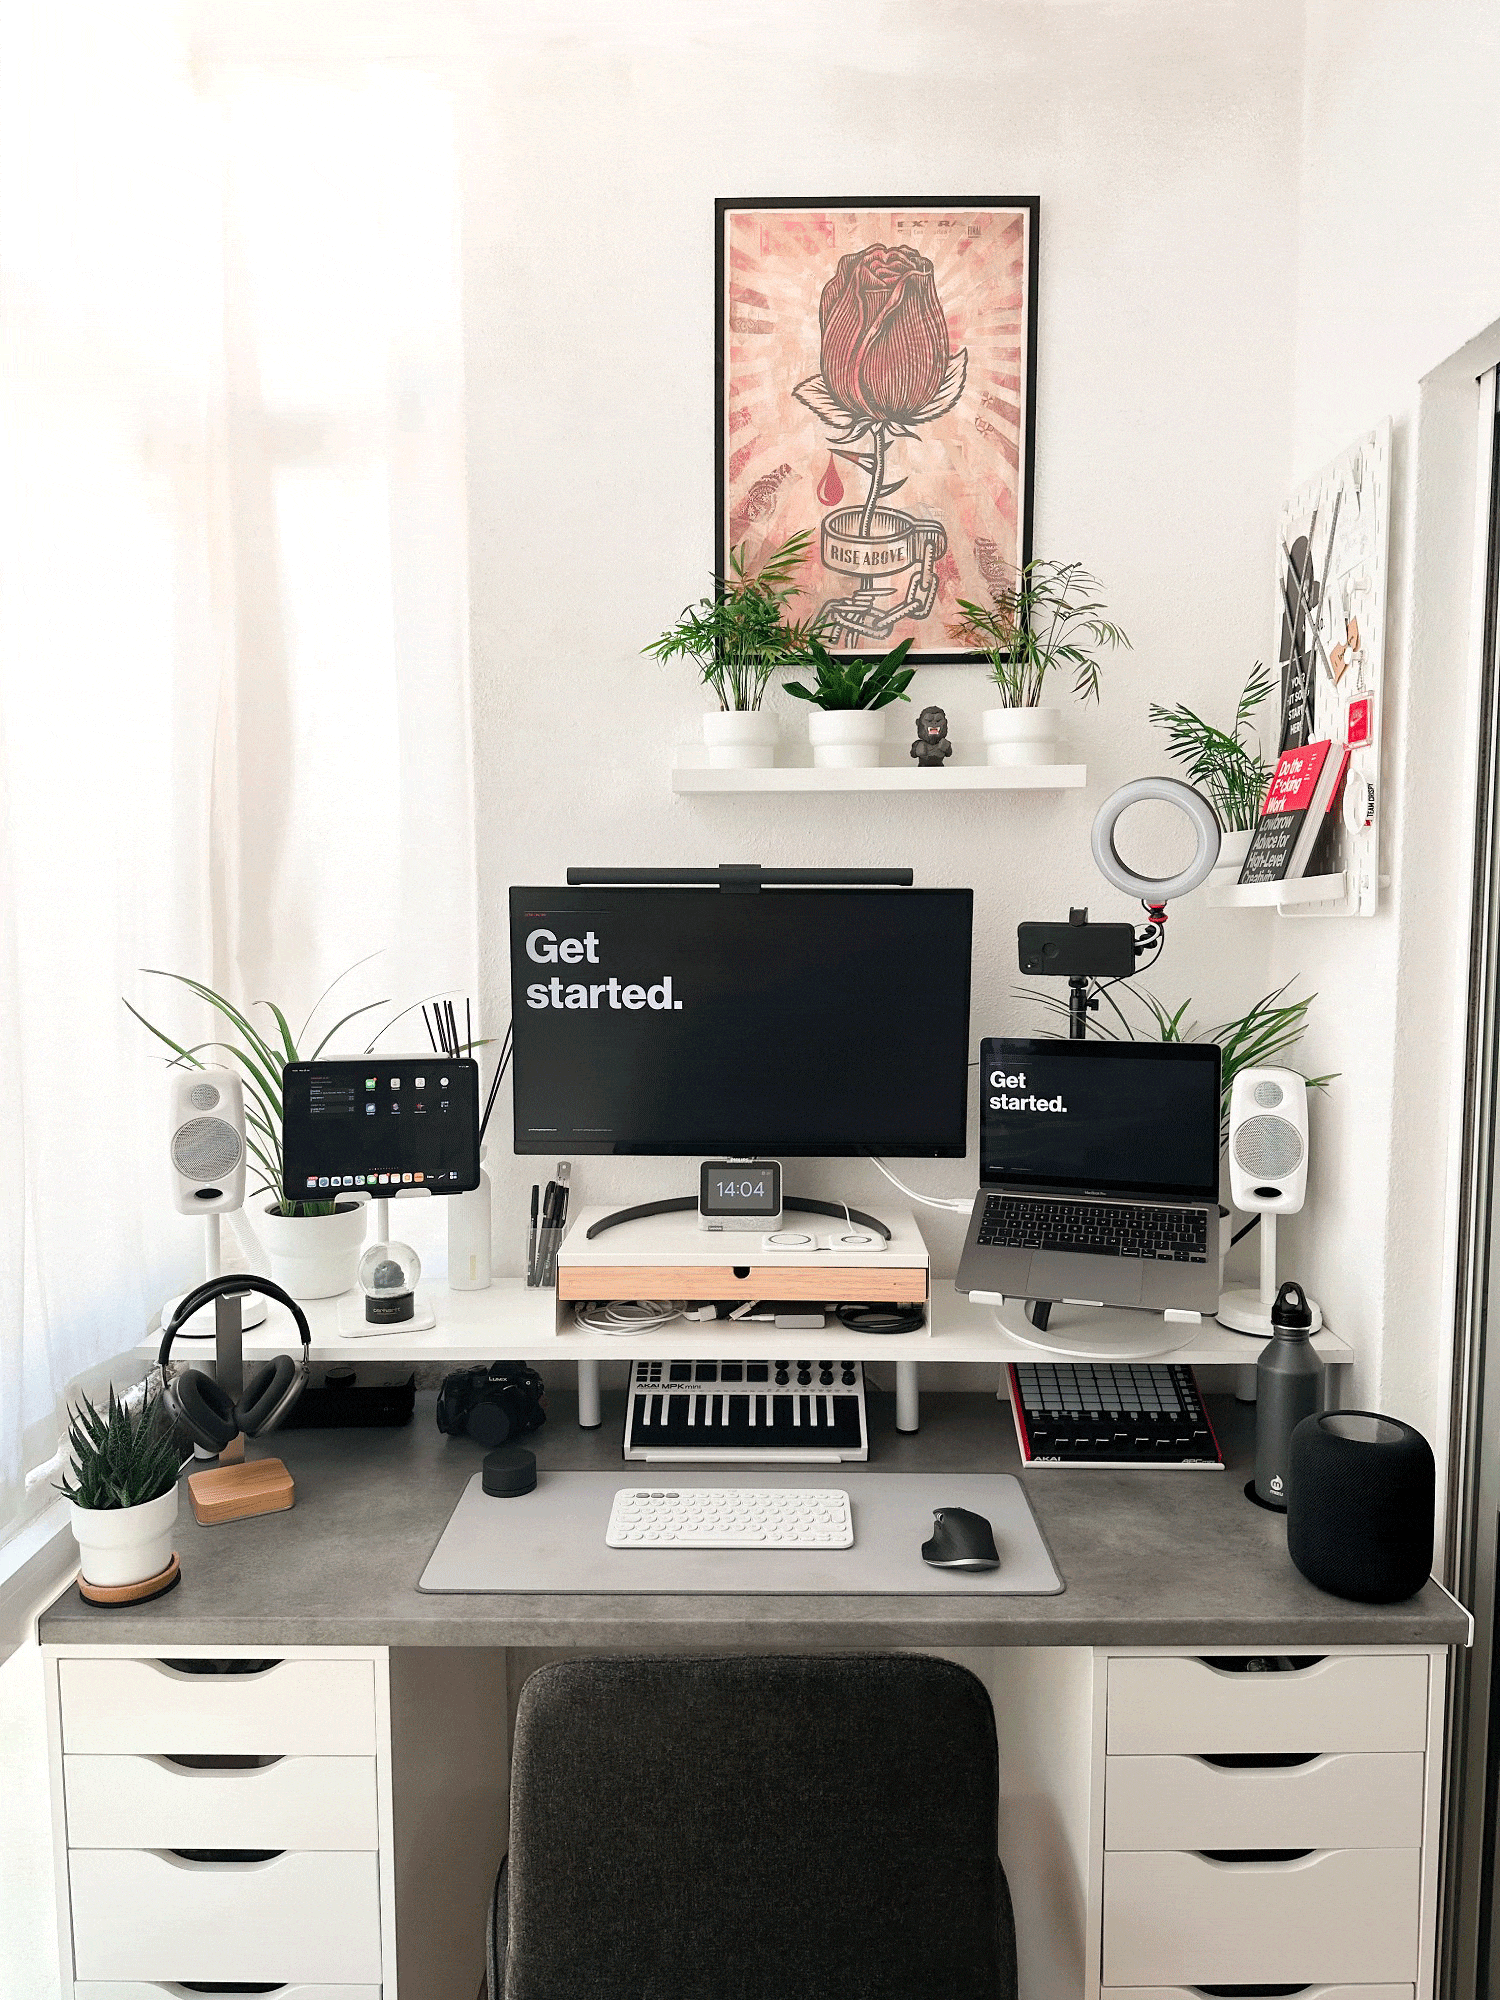 A minimalist desk setup with a laptop on a stand, a MIDI keyboard, a camera, headphones, a microphone, and assorted plants, with a motivational poster on the wall, all in a clean, bright space